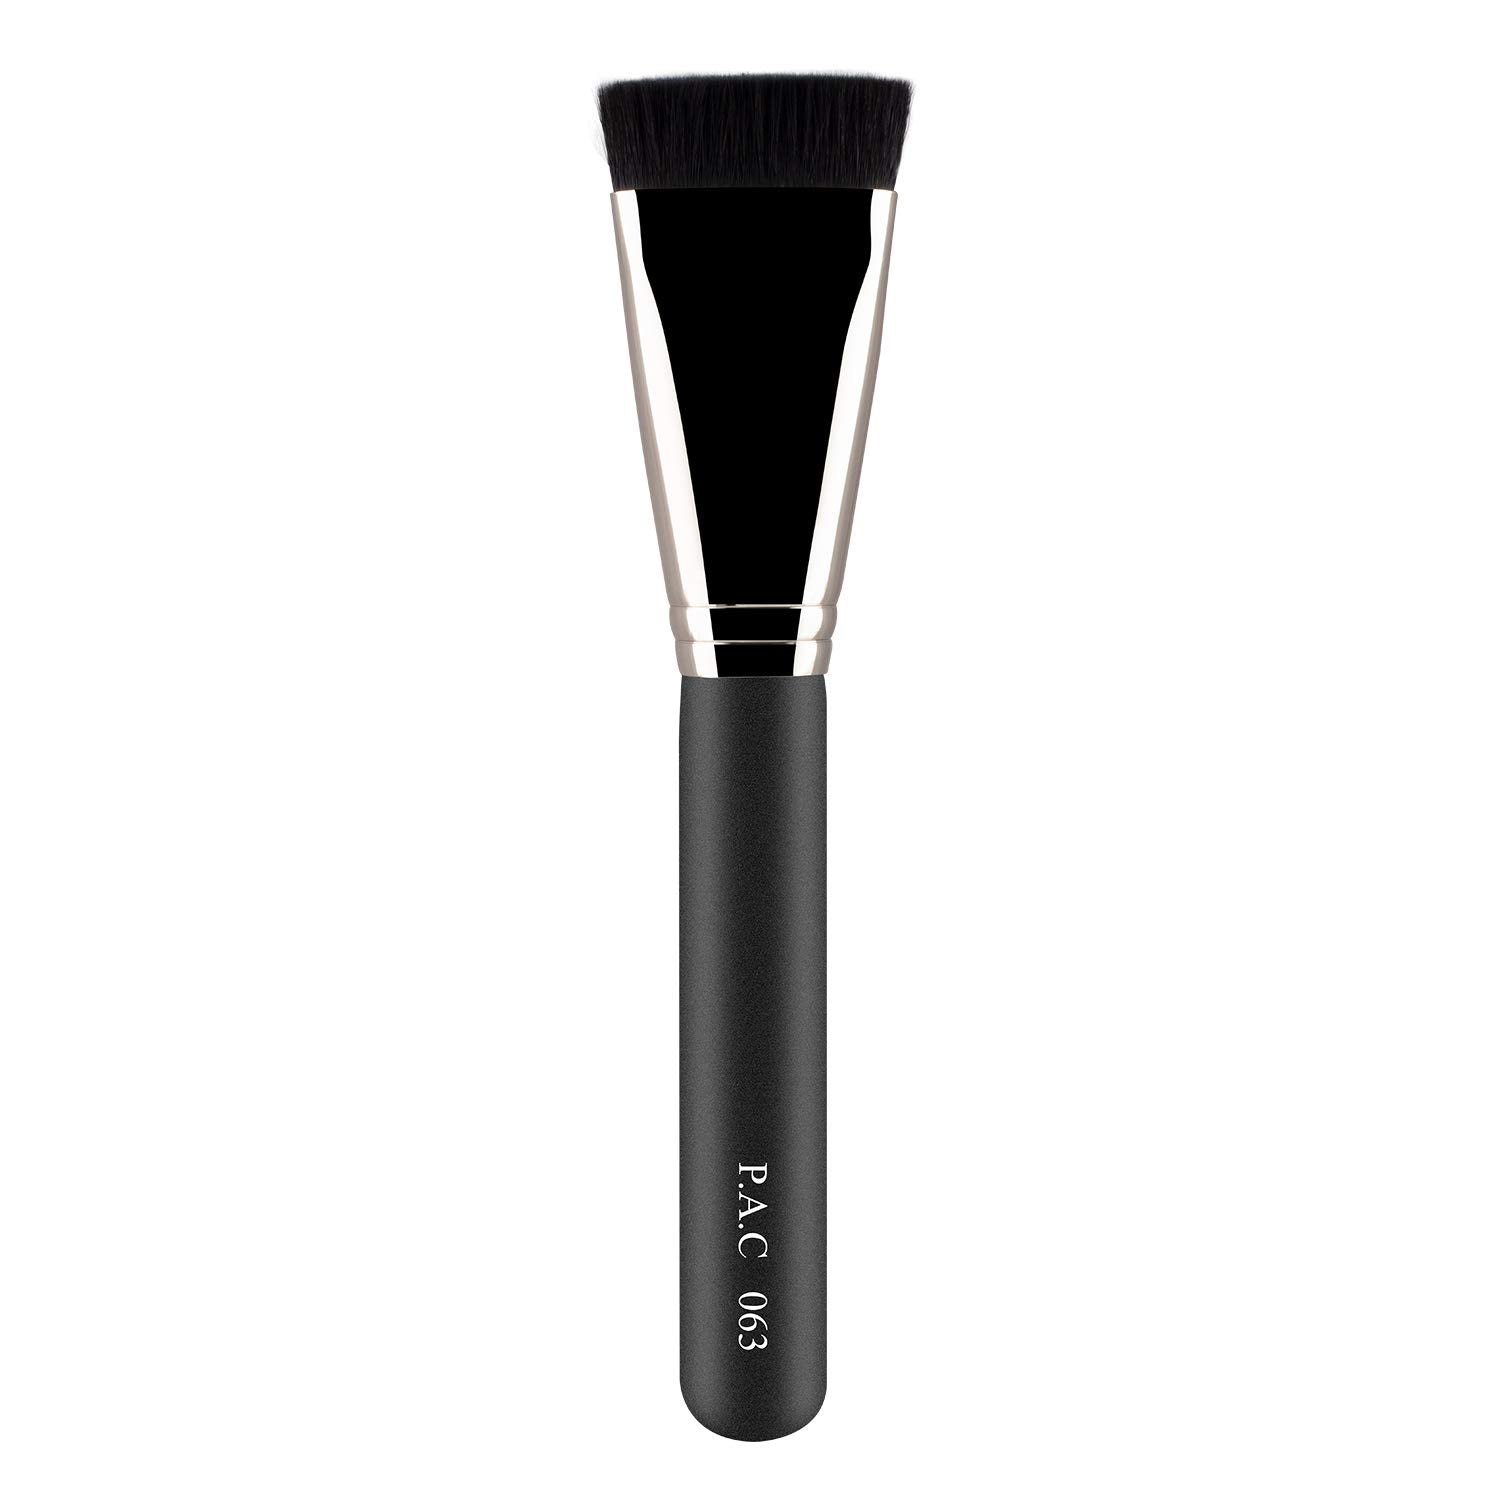 PAC Concealer Brush 063 PAC